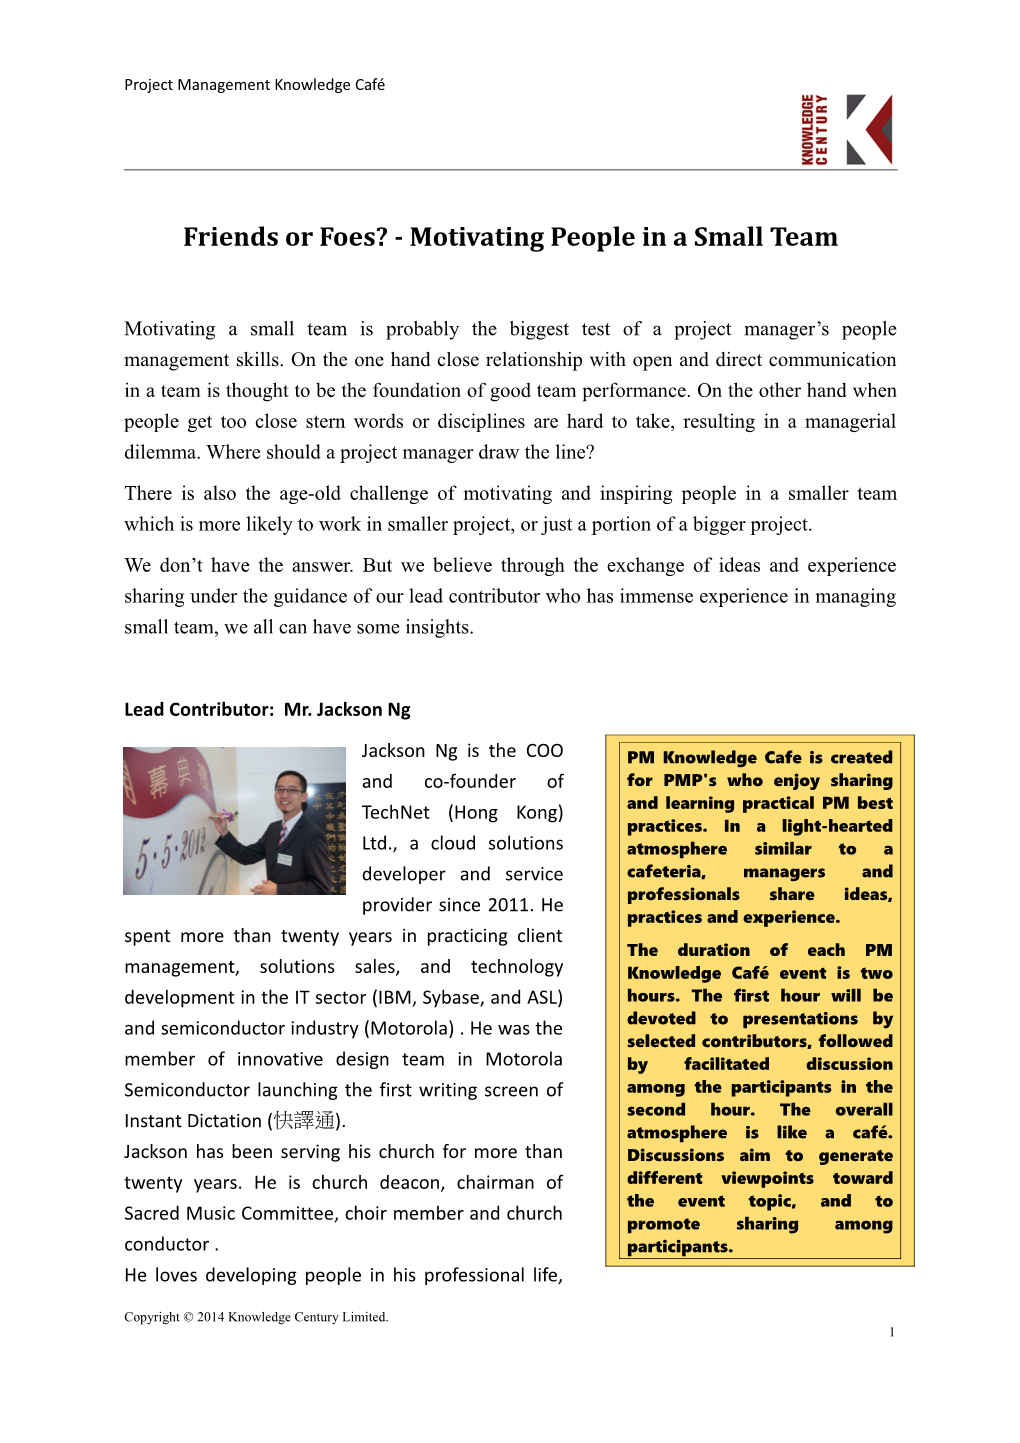 Friends Or Foes? - Motivating People in a Small Team